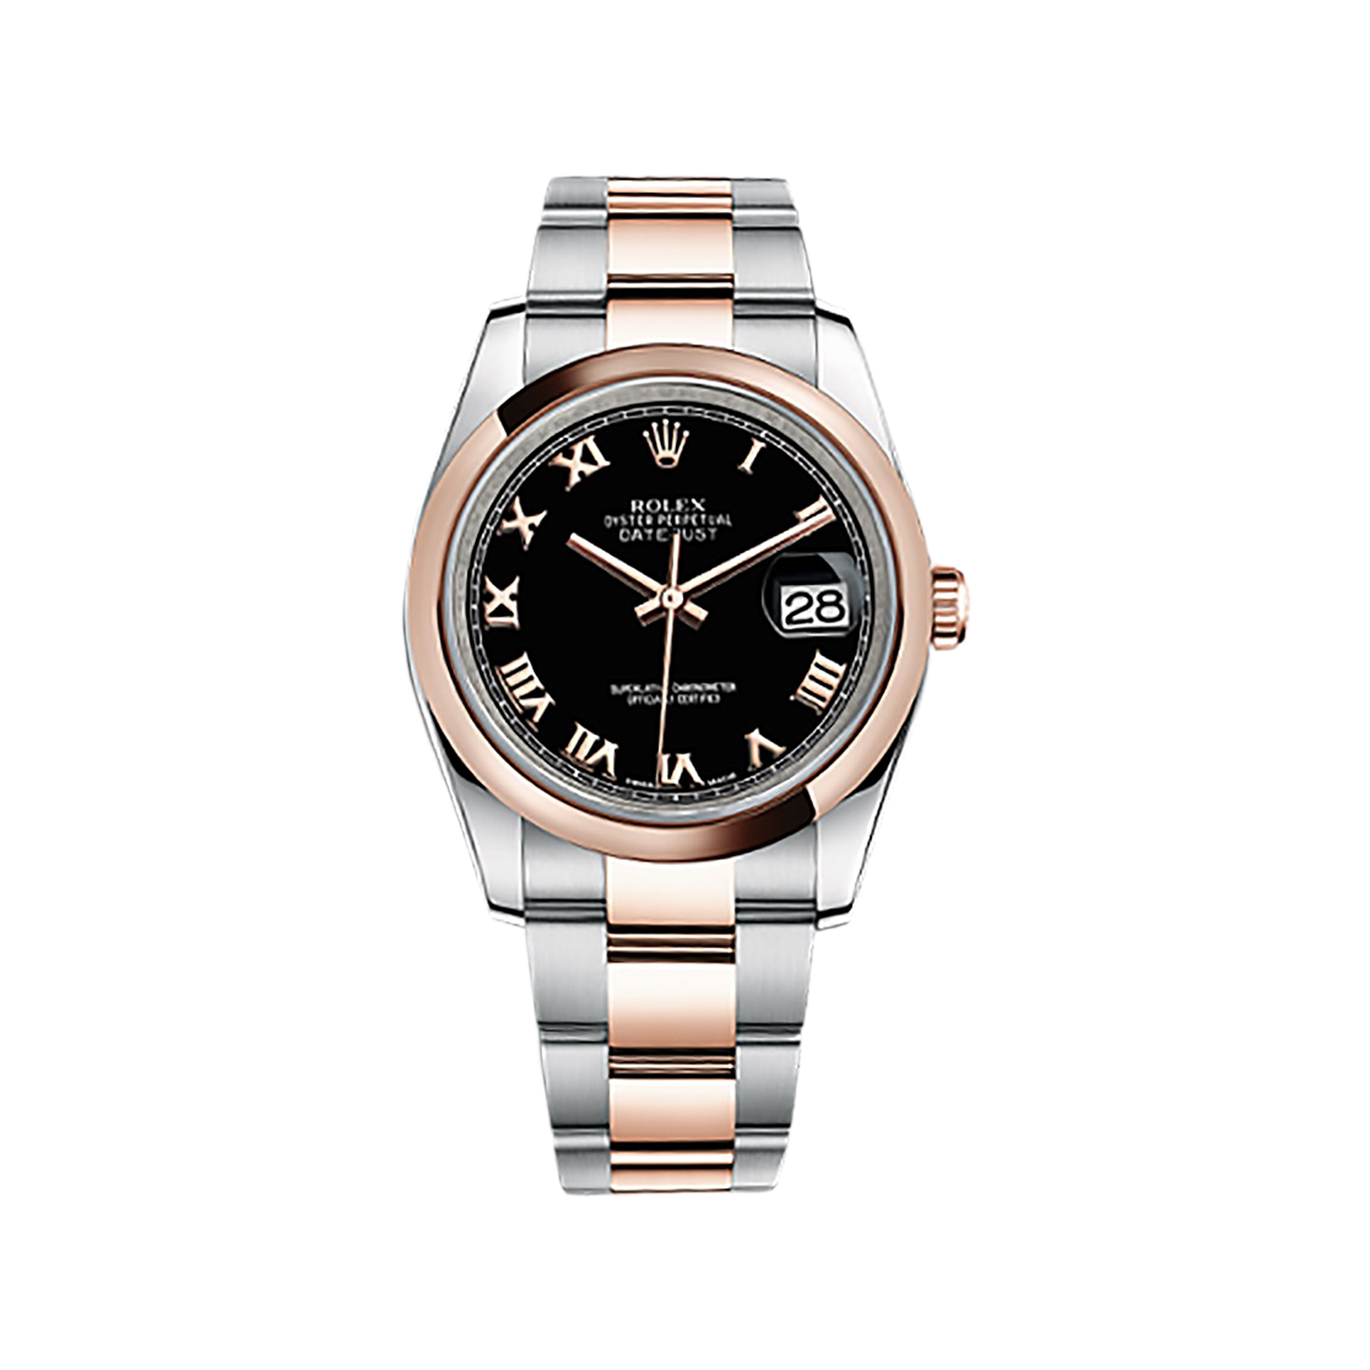 Datejust 36 116201 Rose Gold & Stainless Steel Watch (Black)